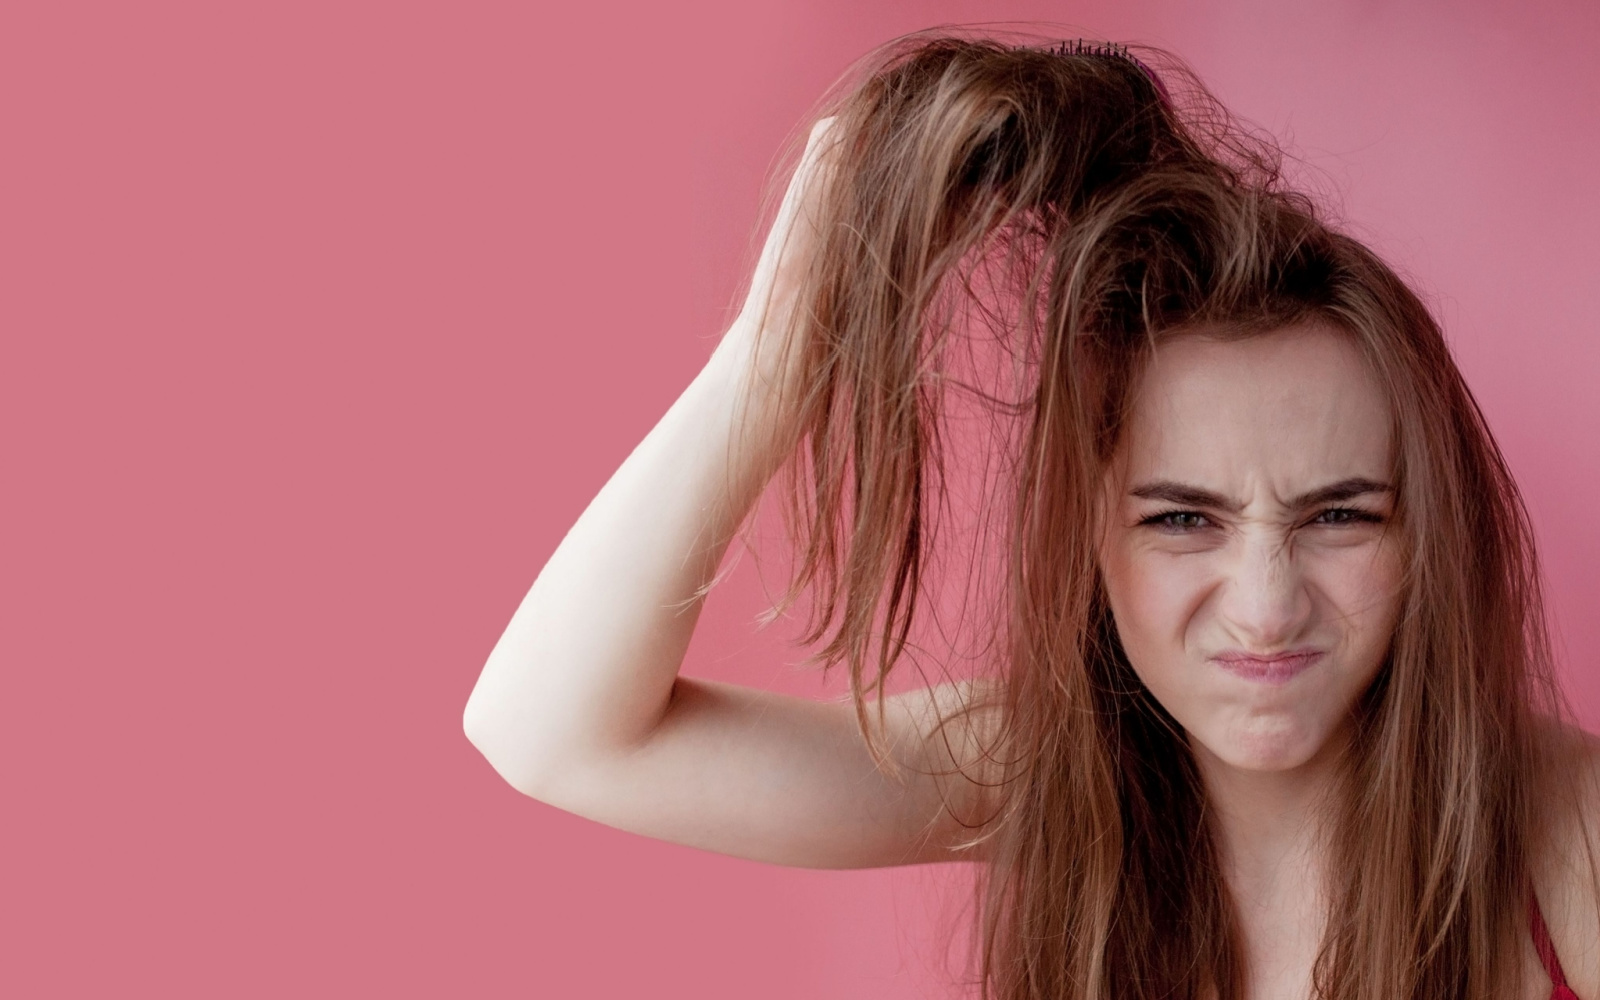 Why Is My Hair Sticky? | 5 Main Problems & Fixes